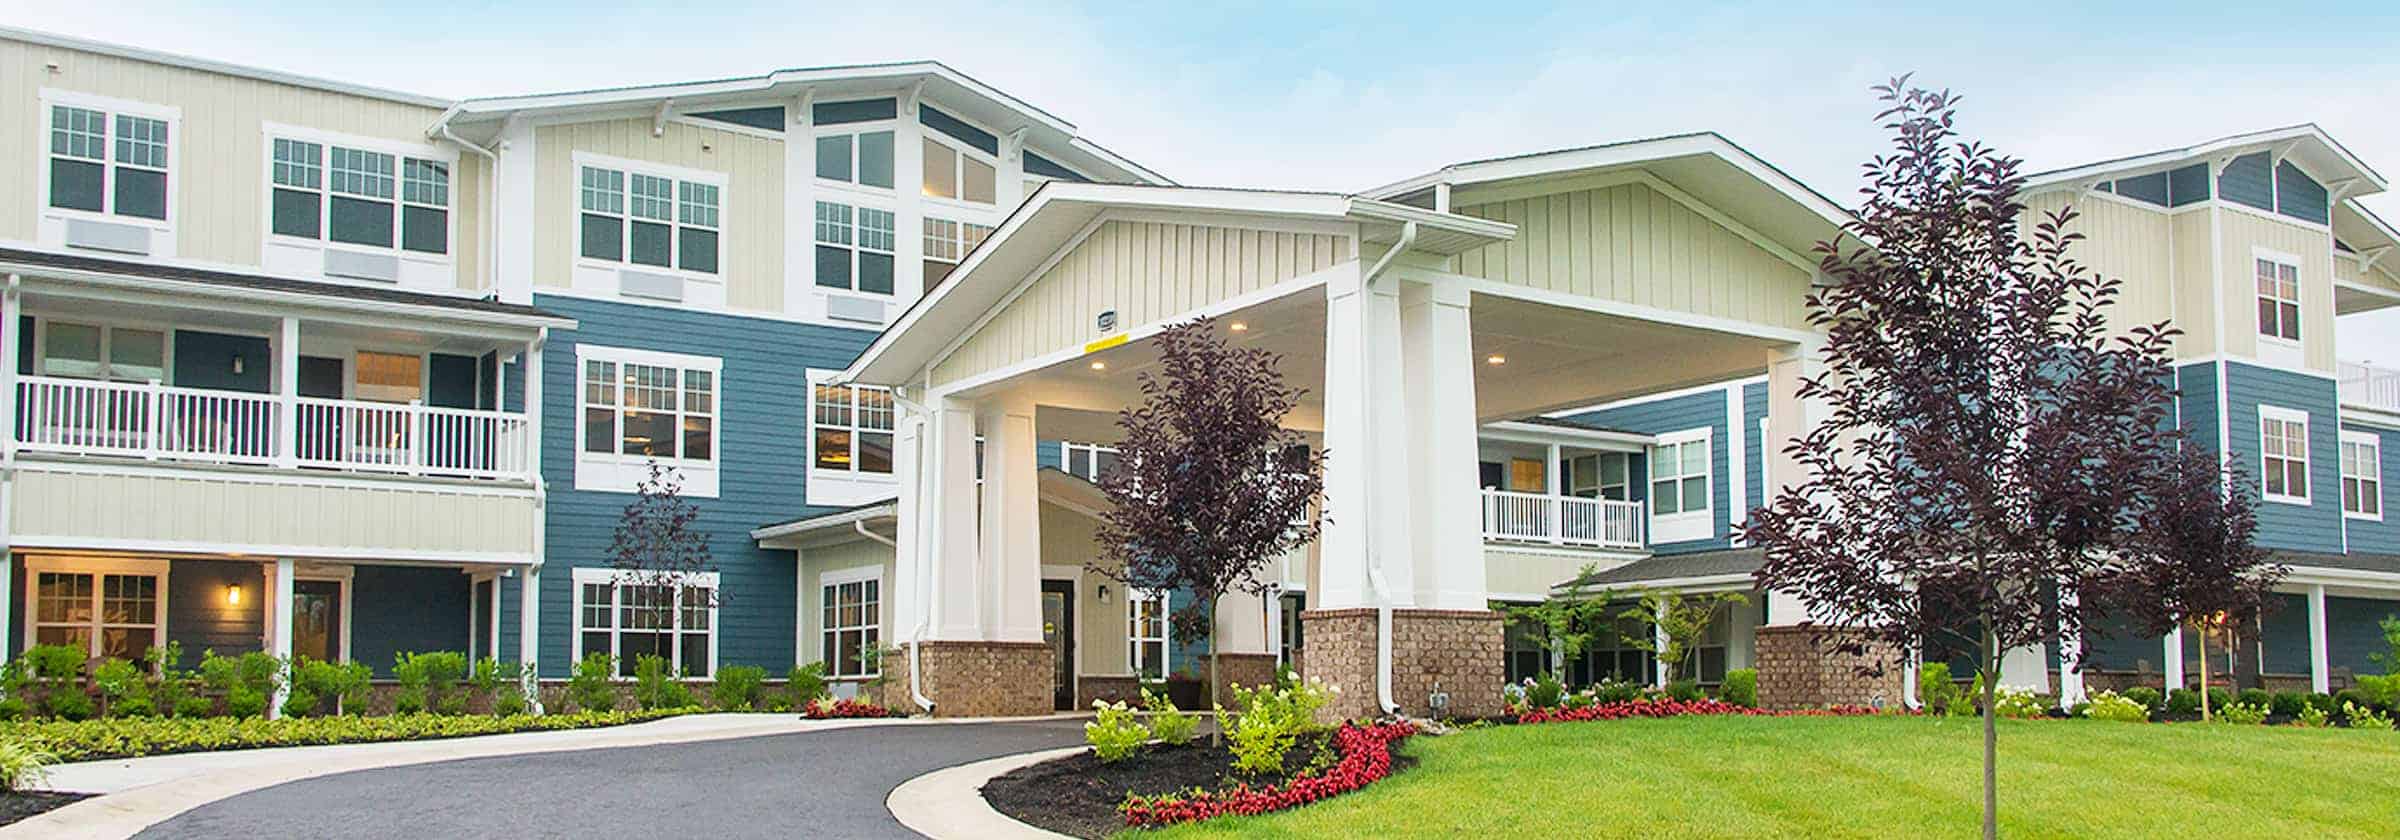 Front view of Traditions of Deerfield senior living community